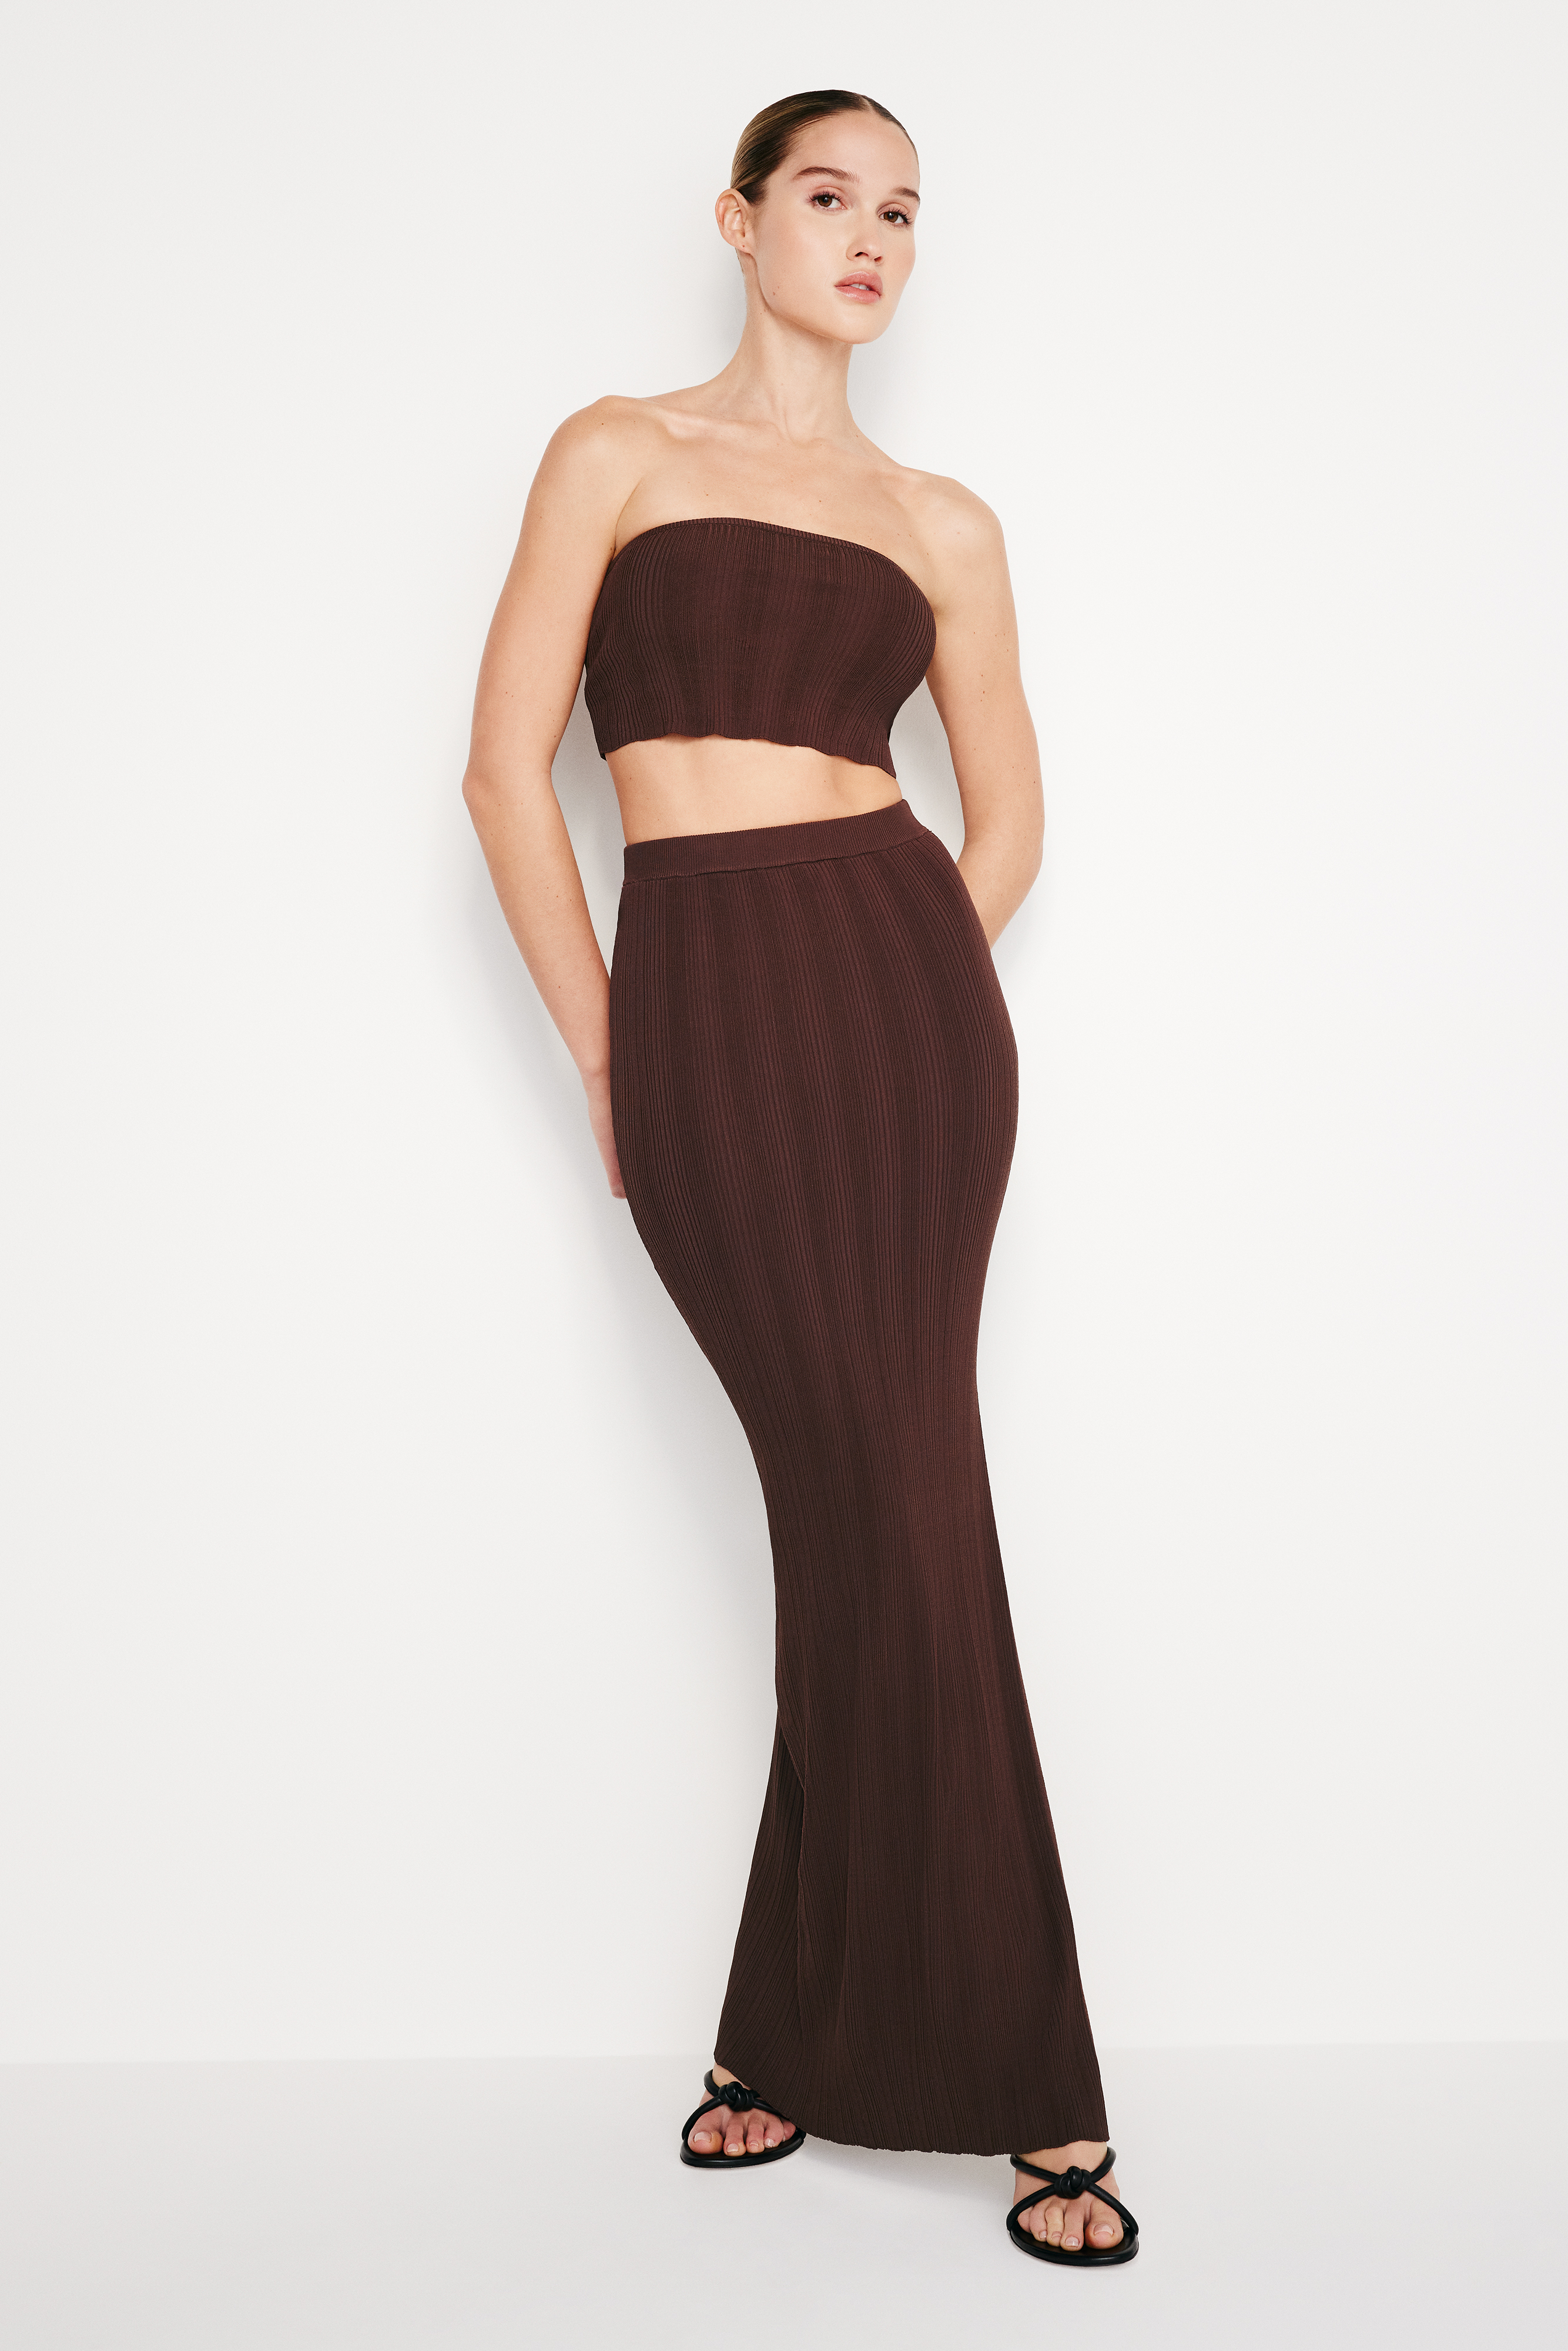 Styled with RIBBED KNIT MAXI SKIRT | ESPRESSO001